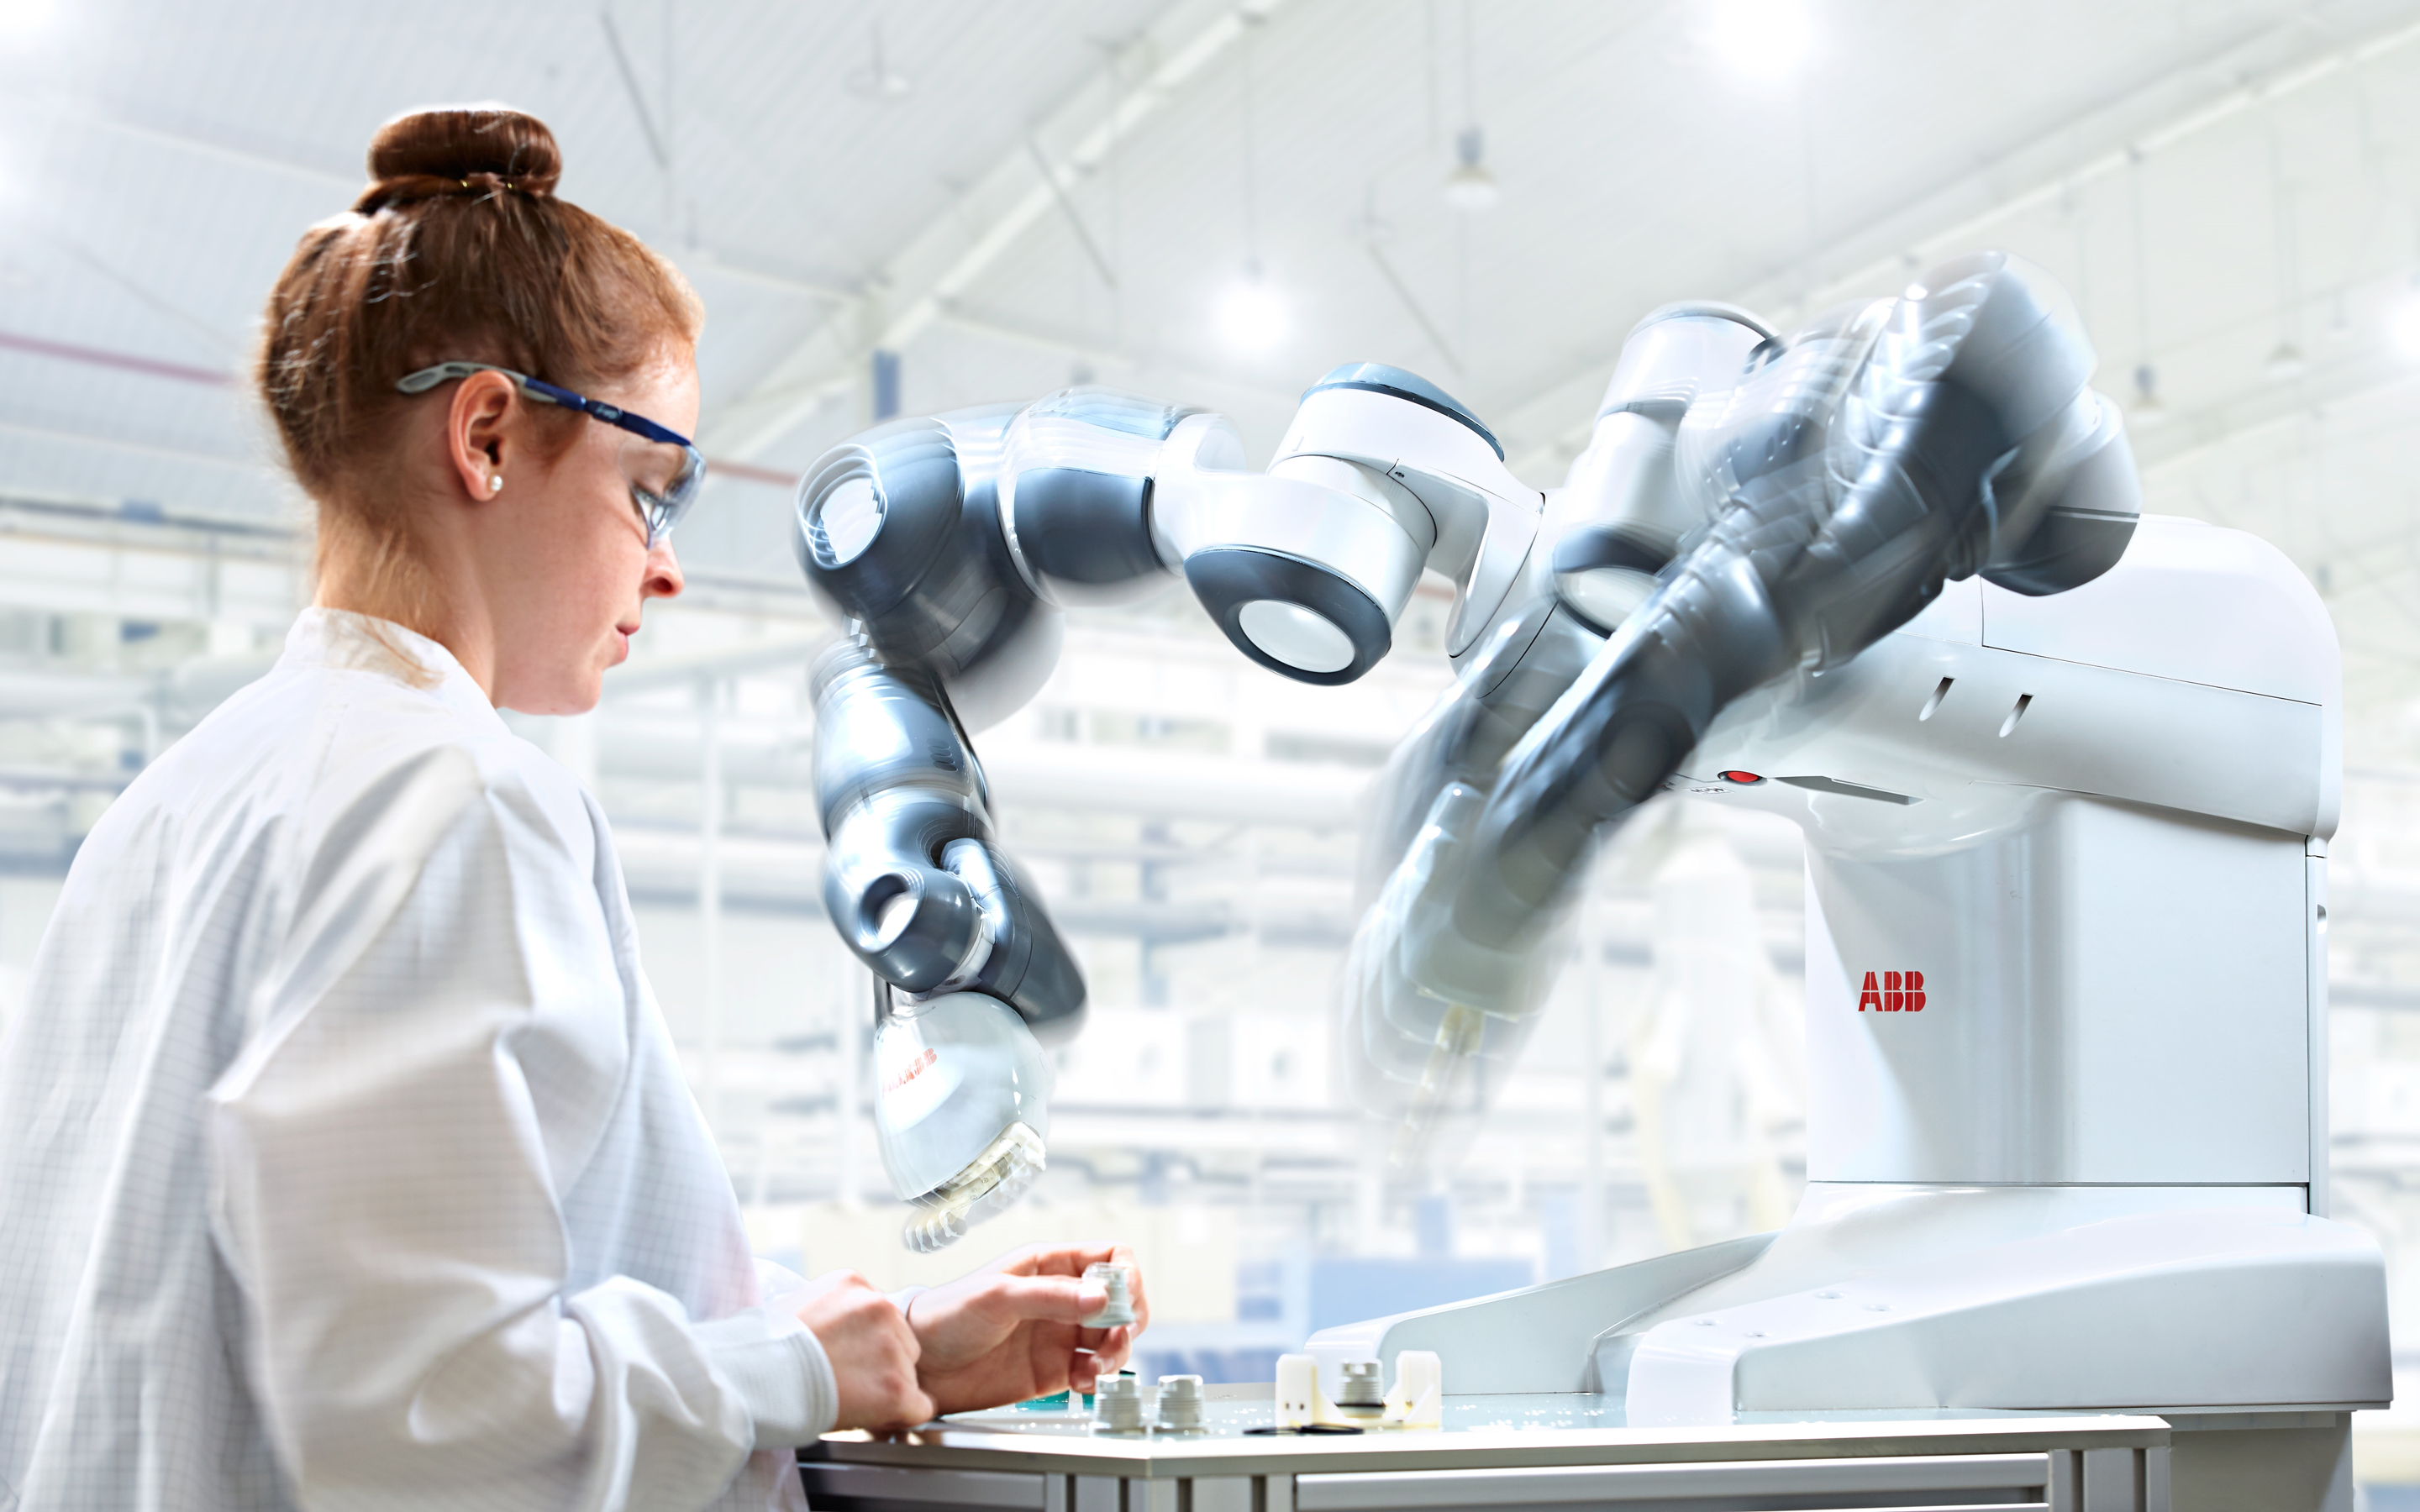 ABB to manufacture robots in the United States